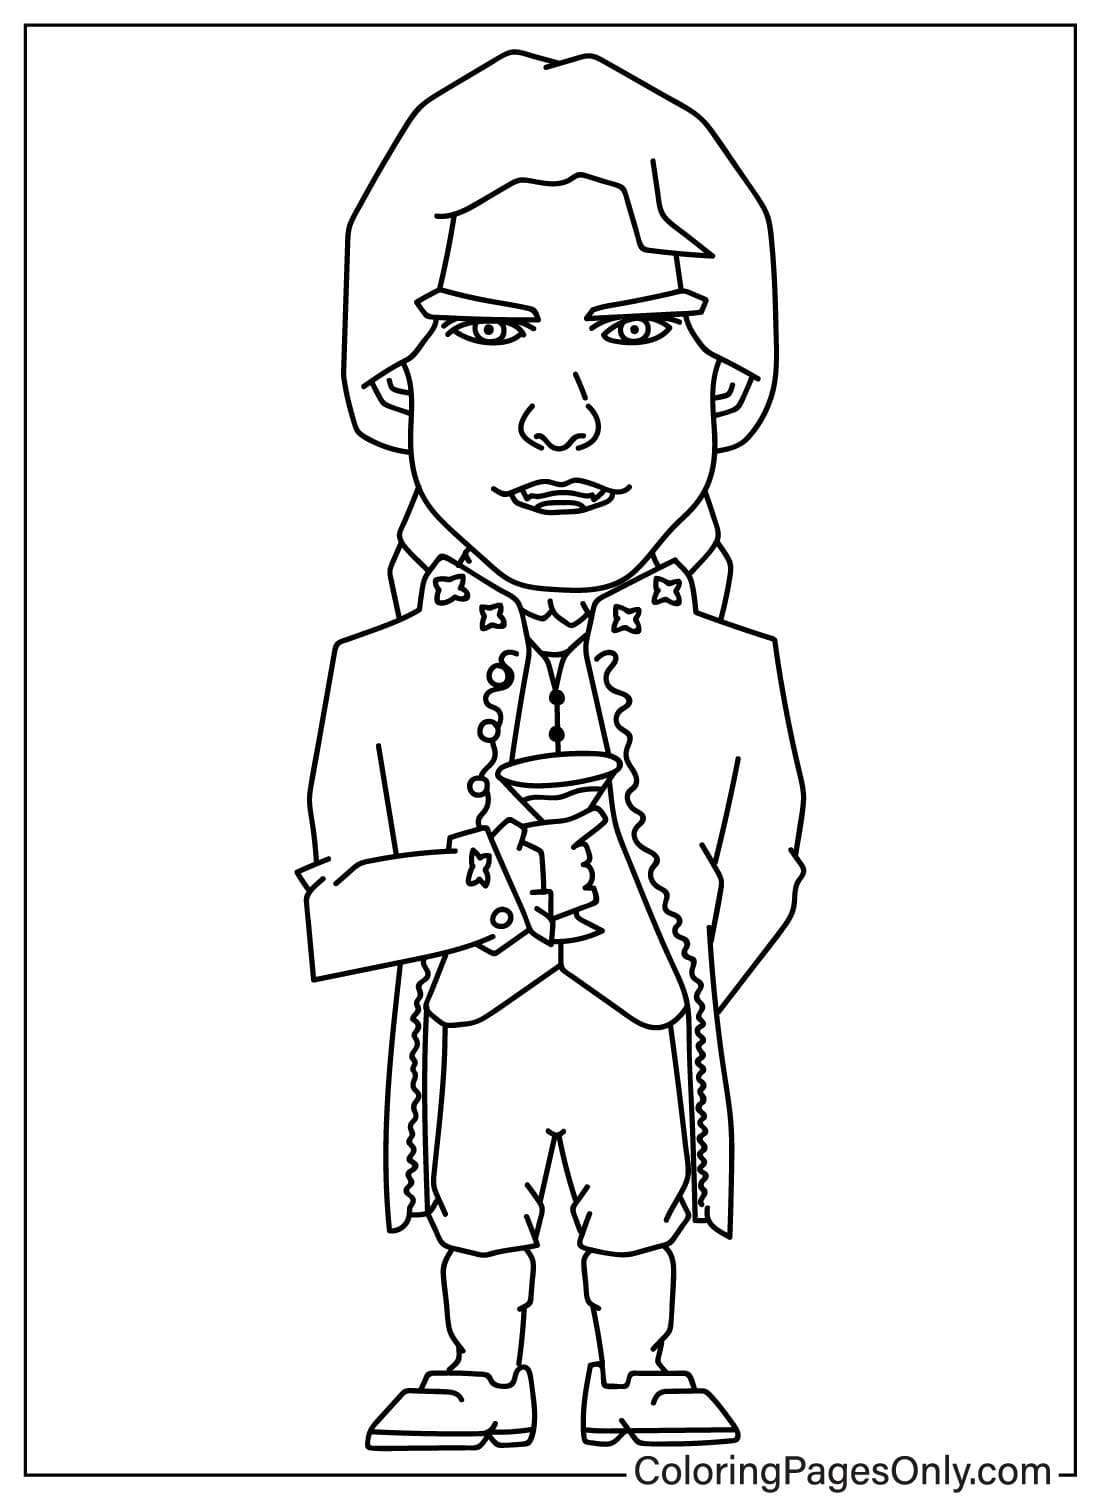 Tom Cruise from Interview with the Vampire Coloring Page from Tom Cruise